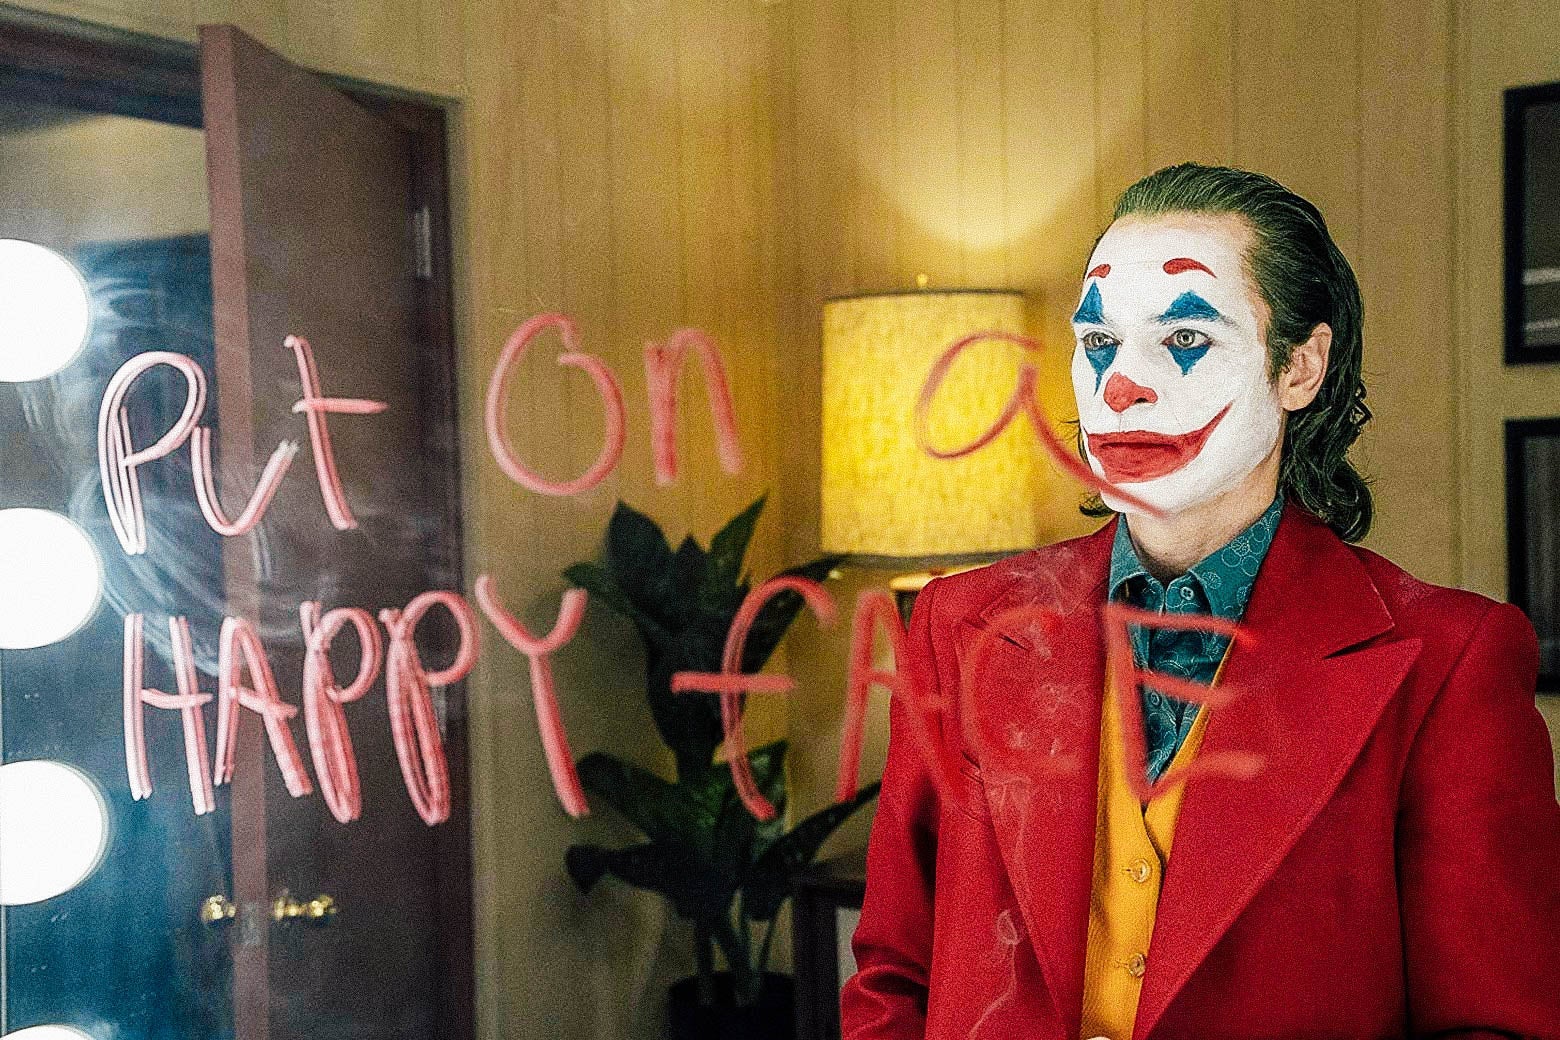 Joker movie review: Don't skip it over fears of violence. Skip it ...